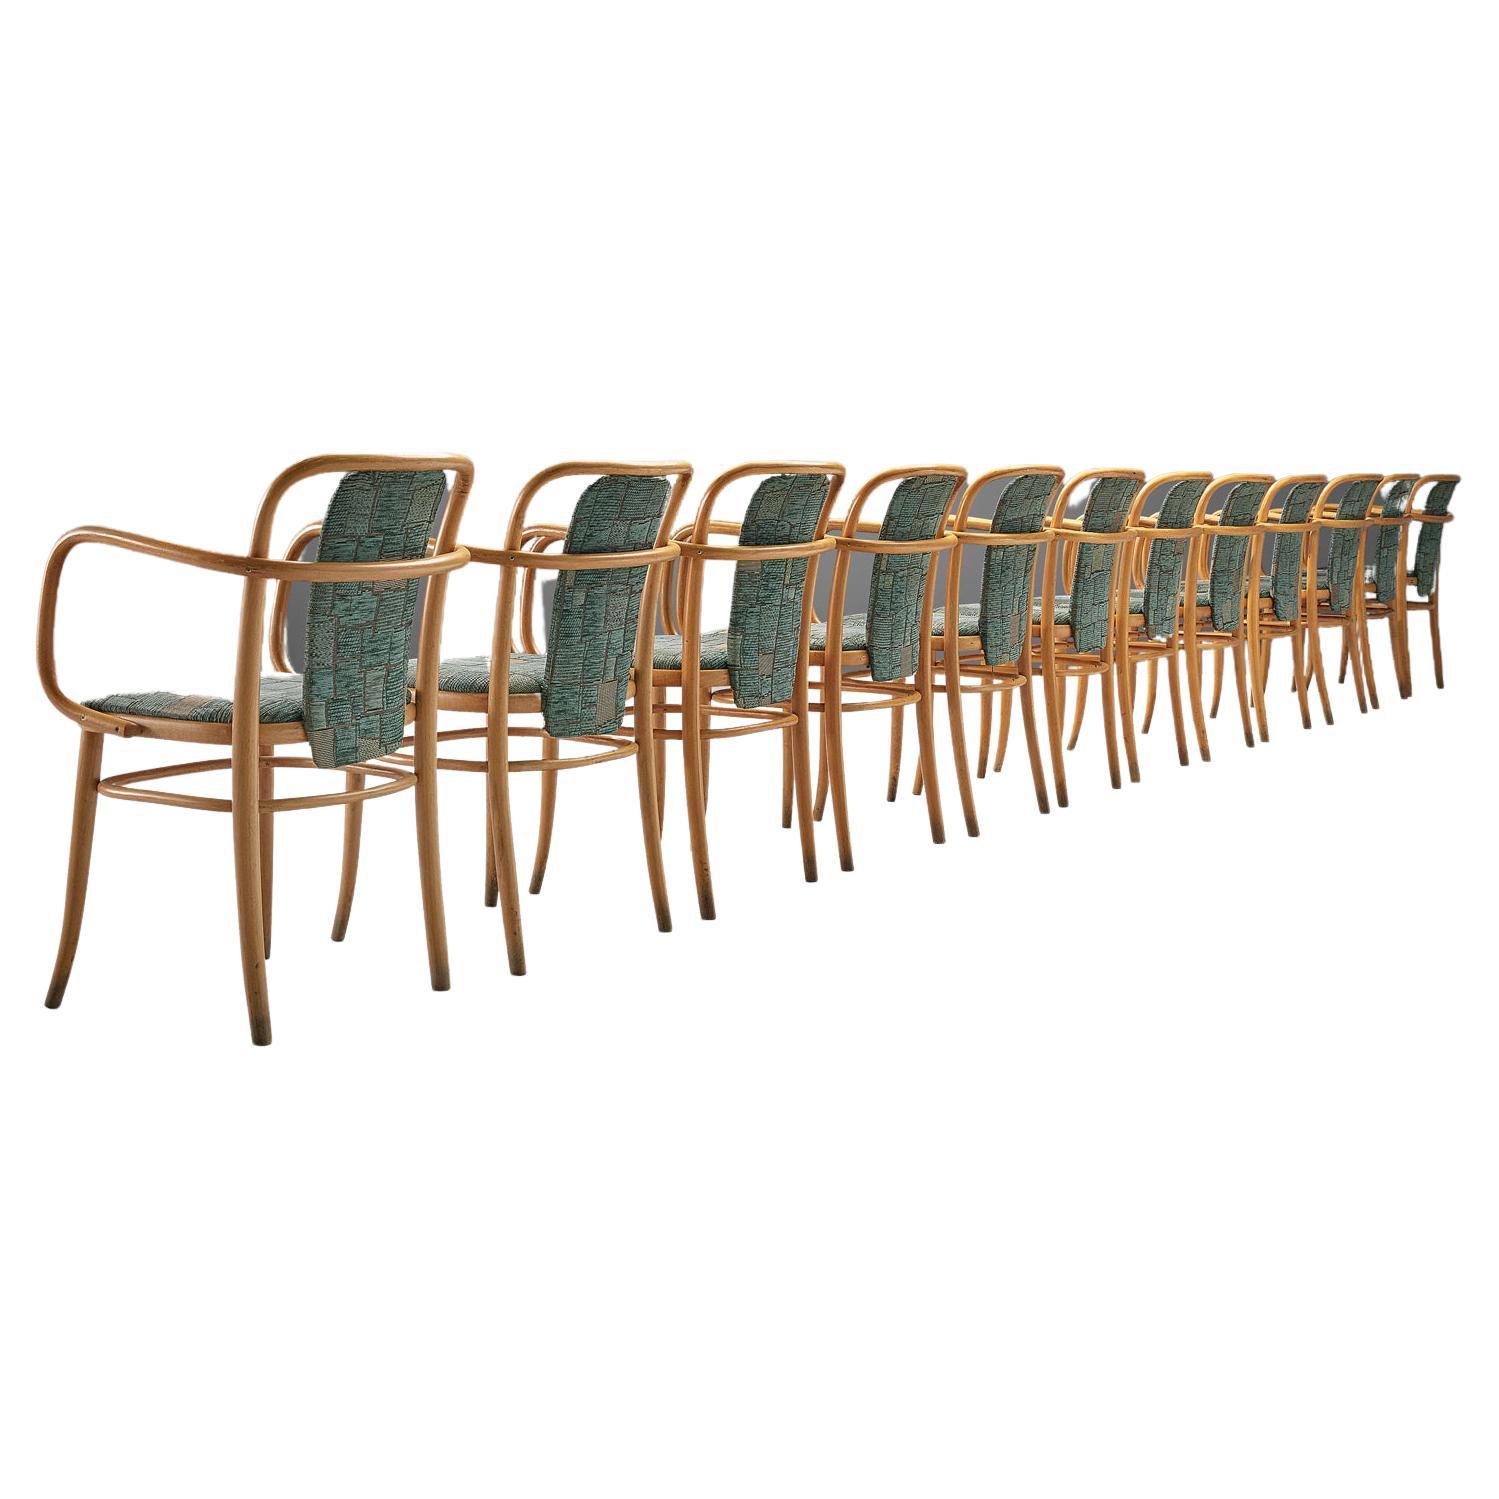 Large Set of Ten Bentwood Armchairs in Green Upholstery